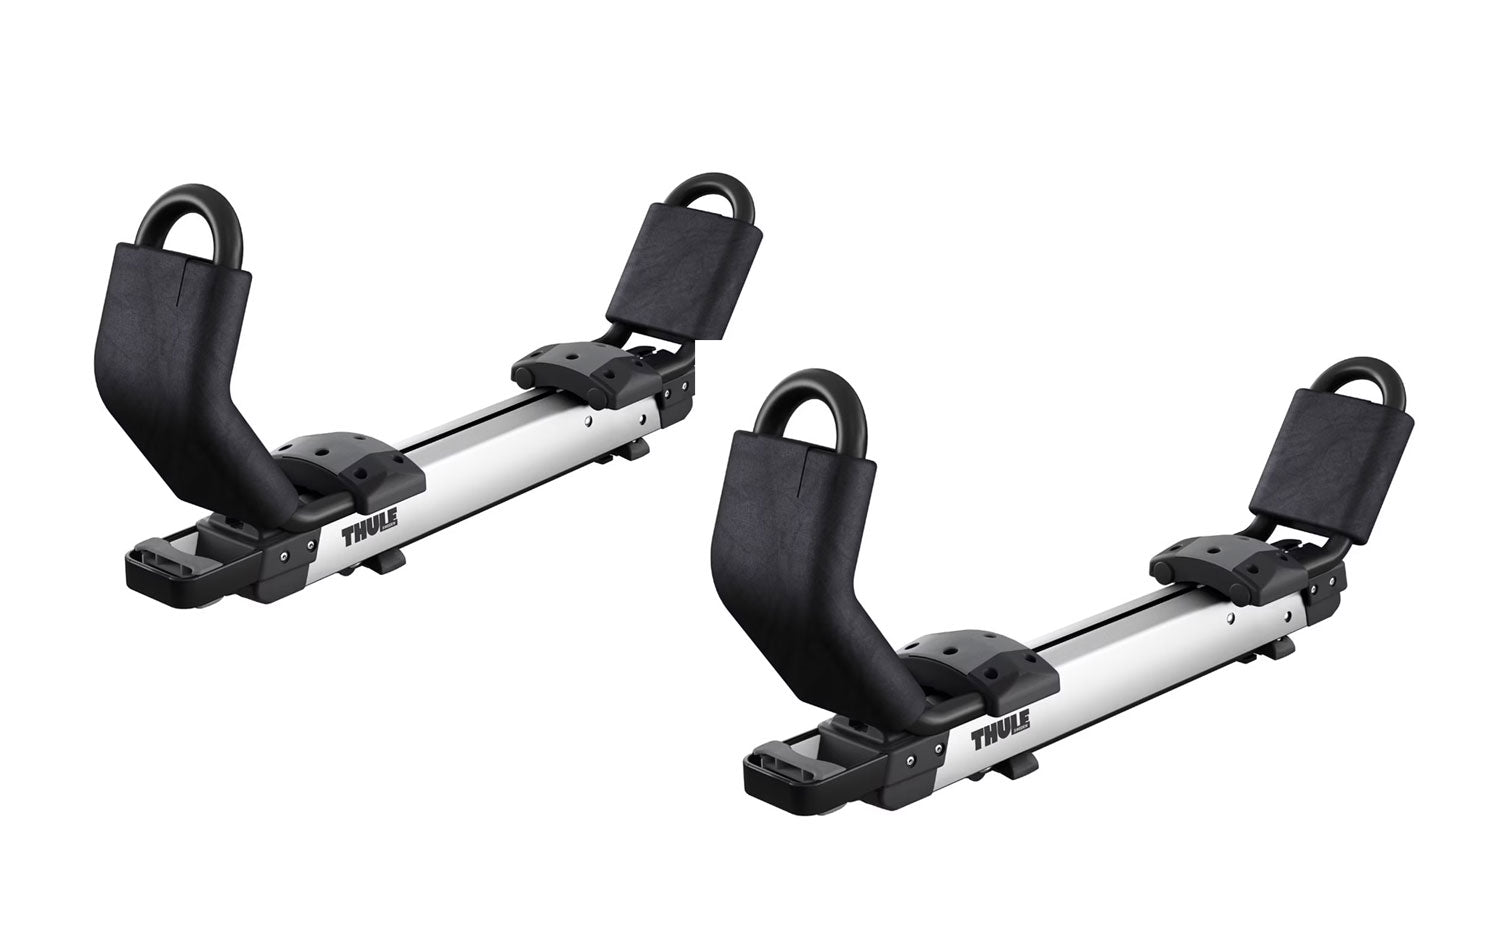 Thule Hullavator Pro shown as the product themselves